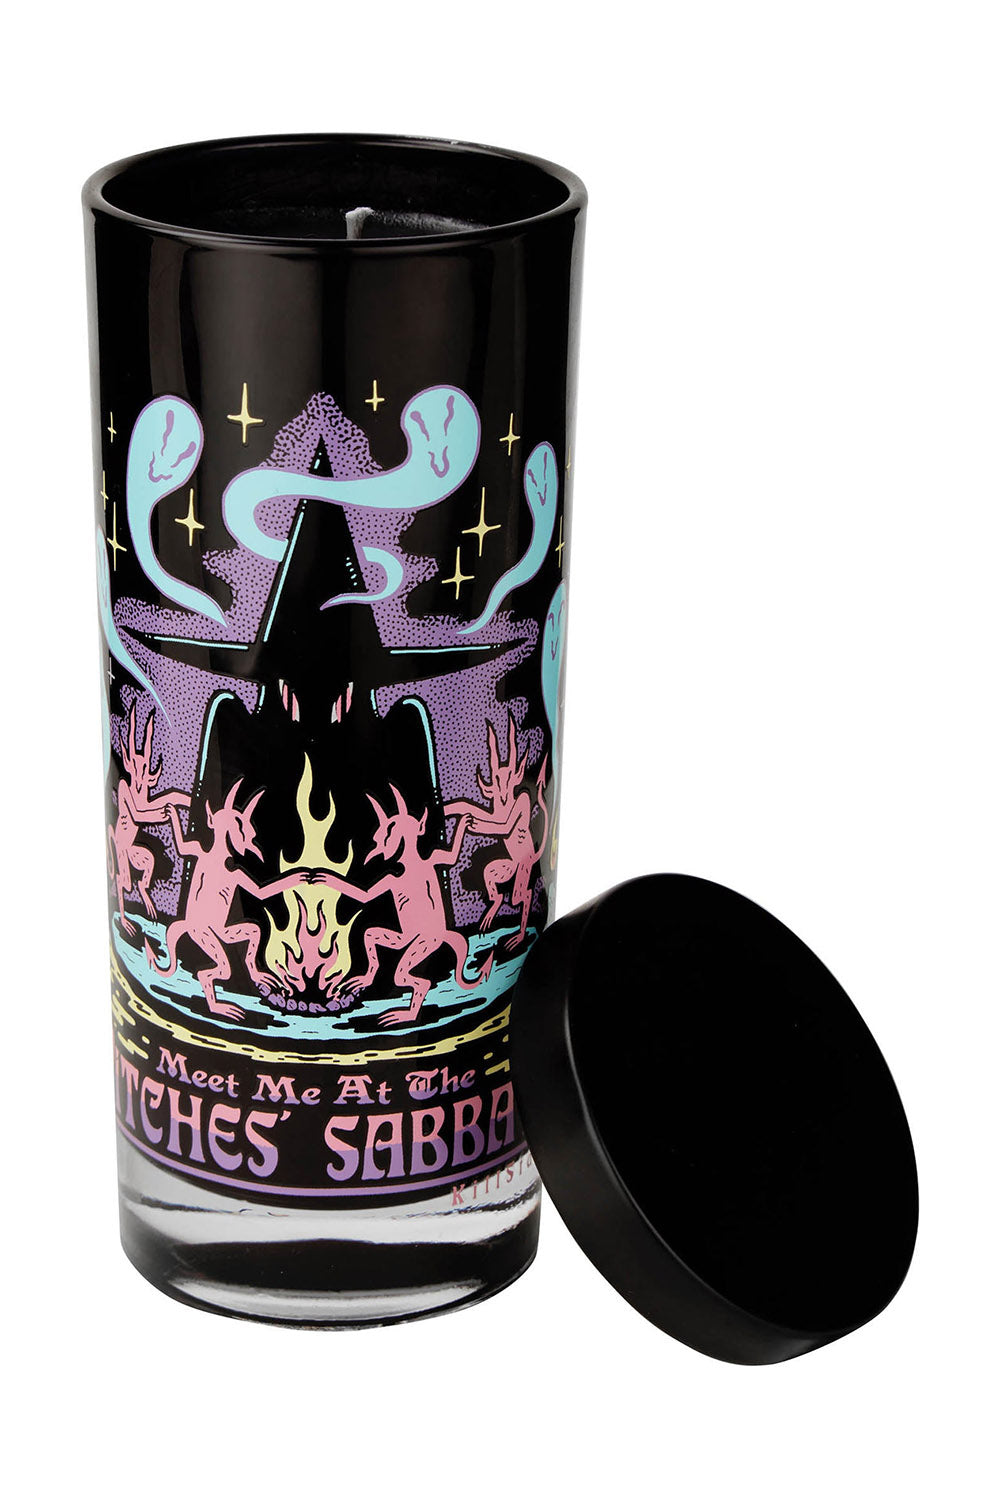 Witches Sabbath Candle